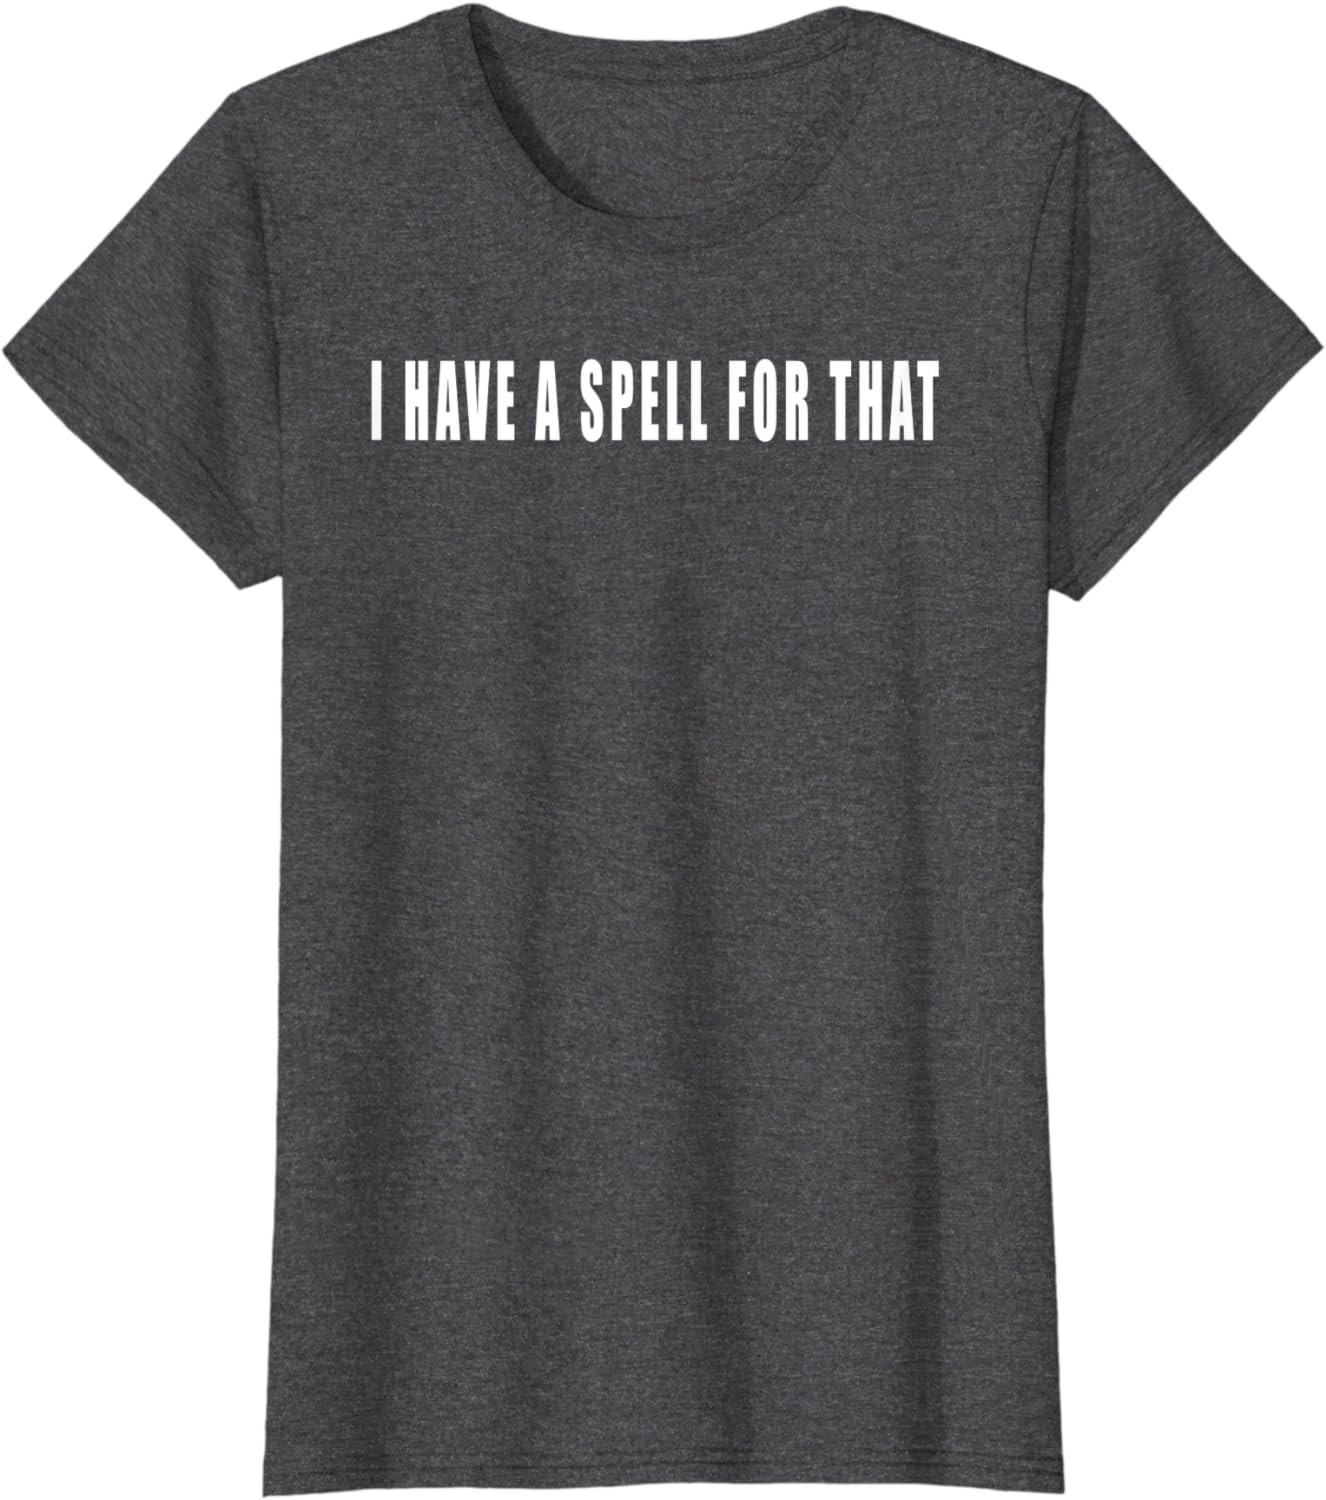 Witch T-Shirt For Witches, Wiccans, And Pagans